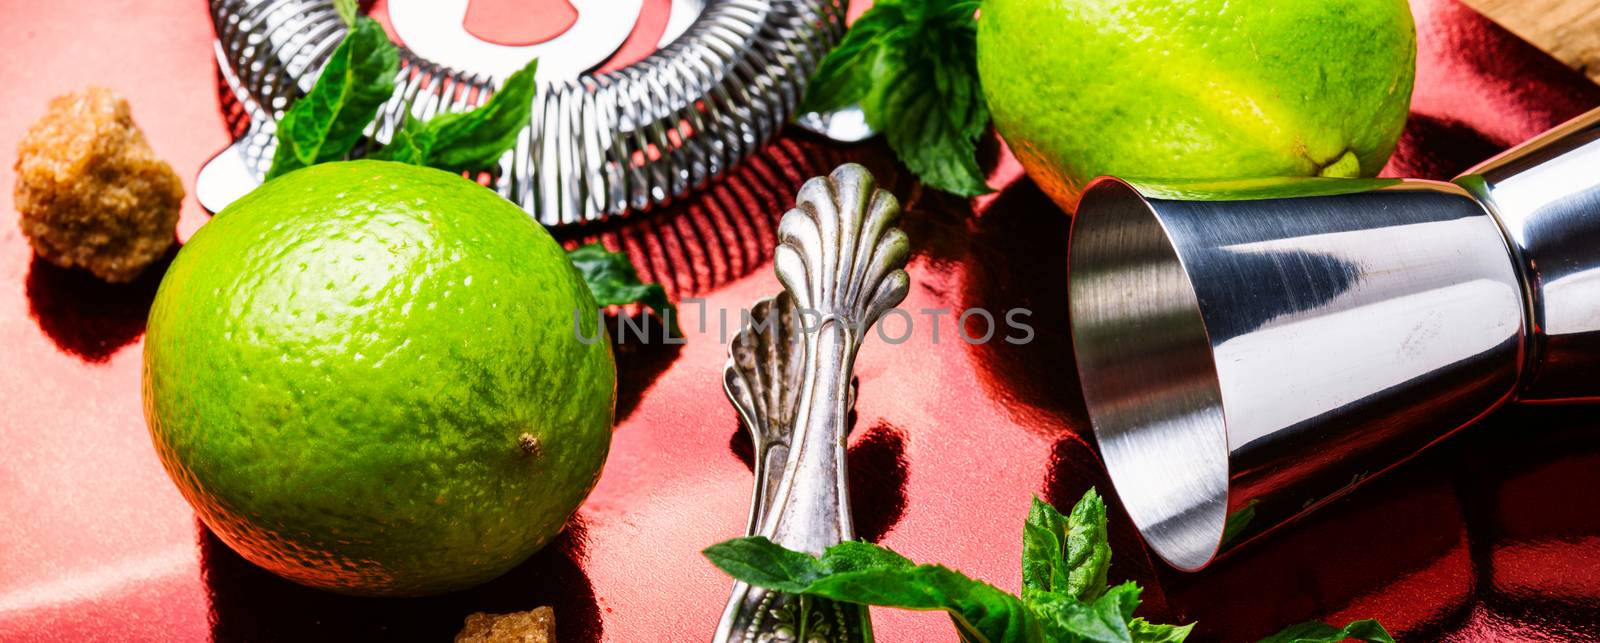 Make mojito cocktail with lime and mint.Food background